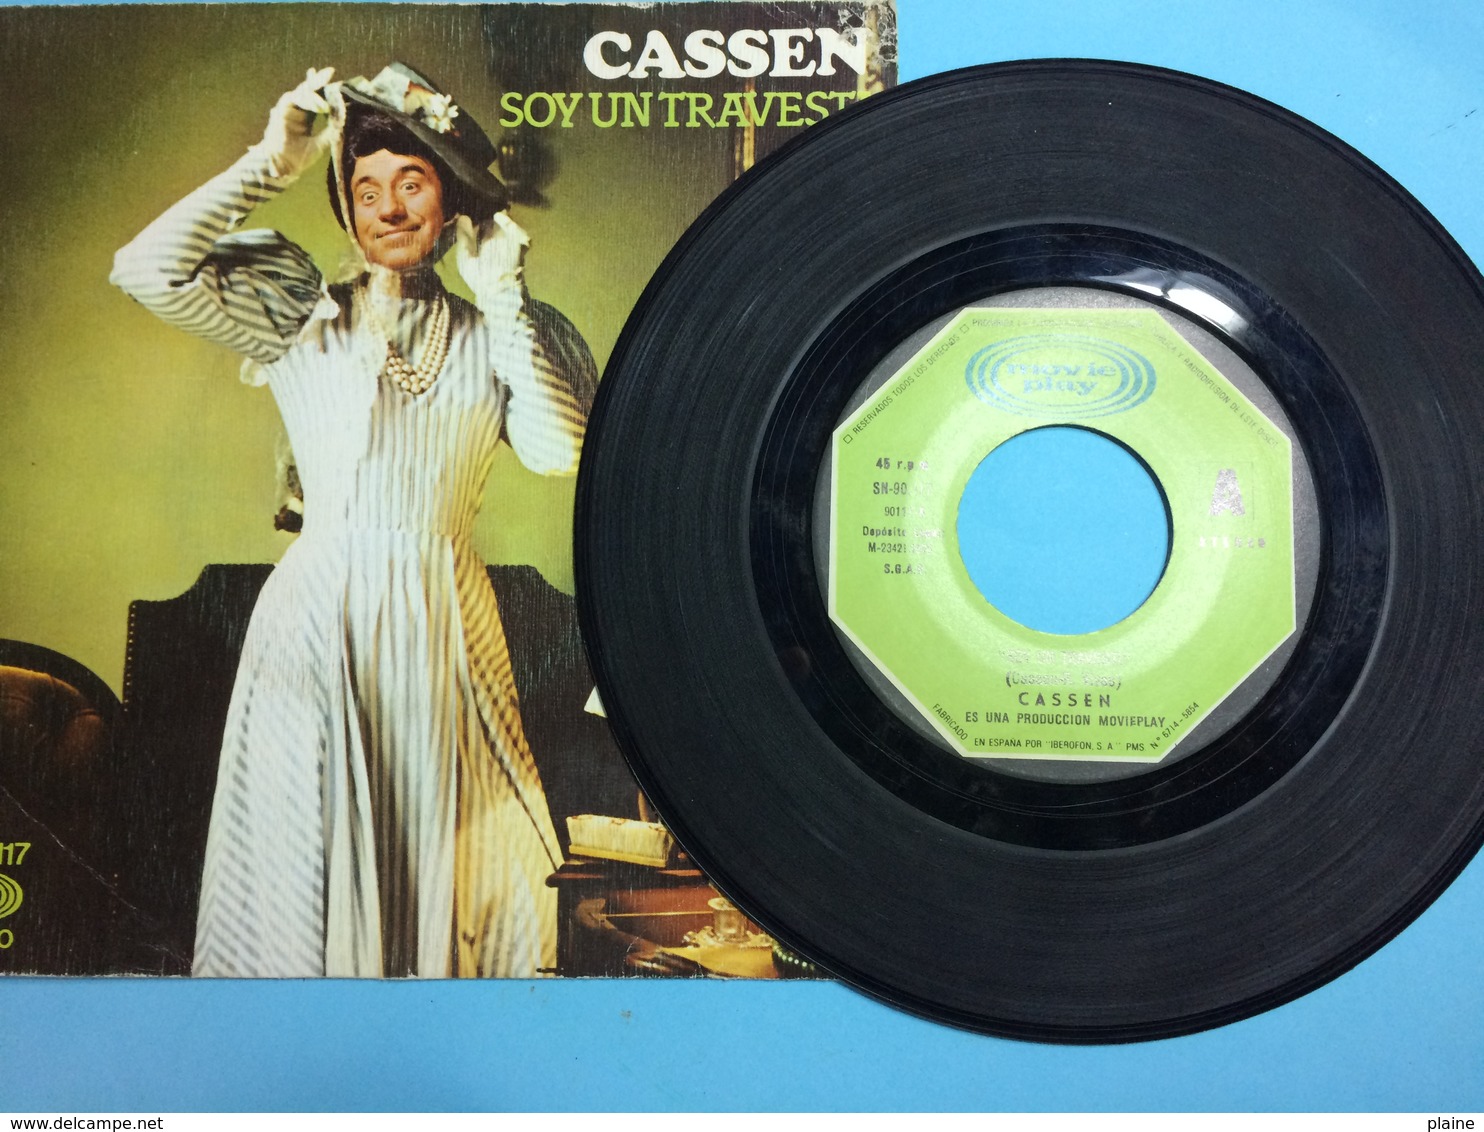 CASSEN- SOY UN TRAVEST-DISQUE 45 T - Other - Spanish Music